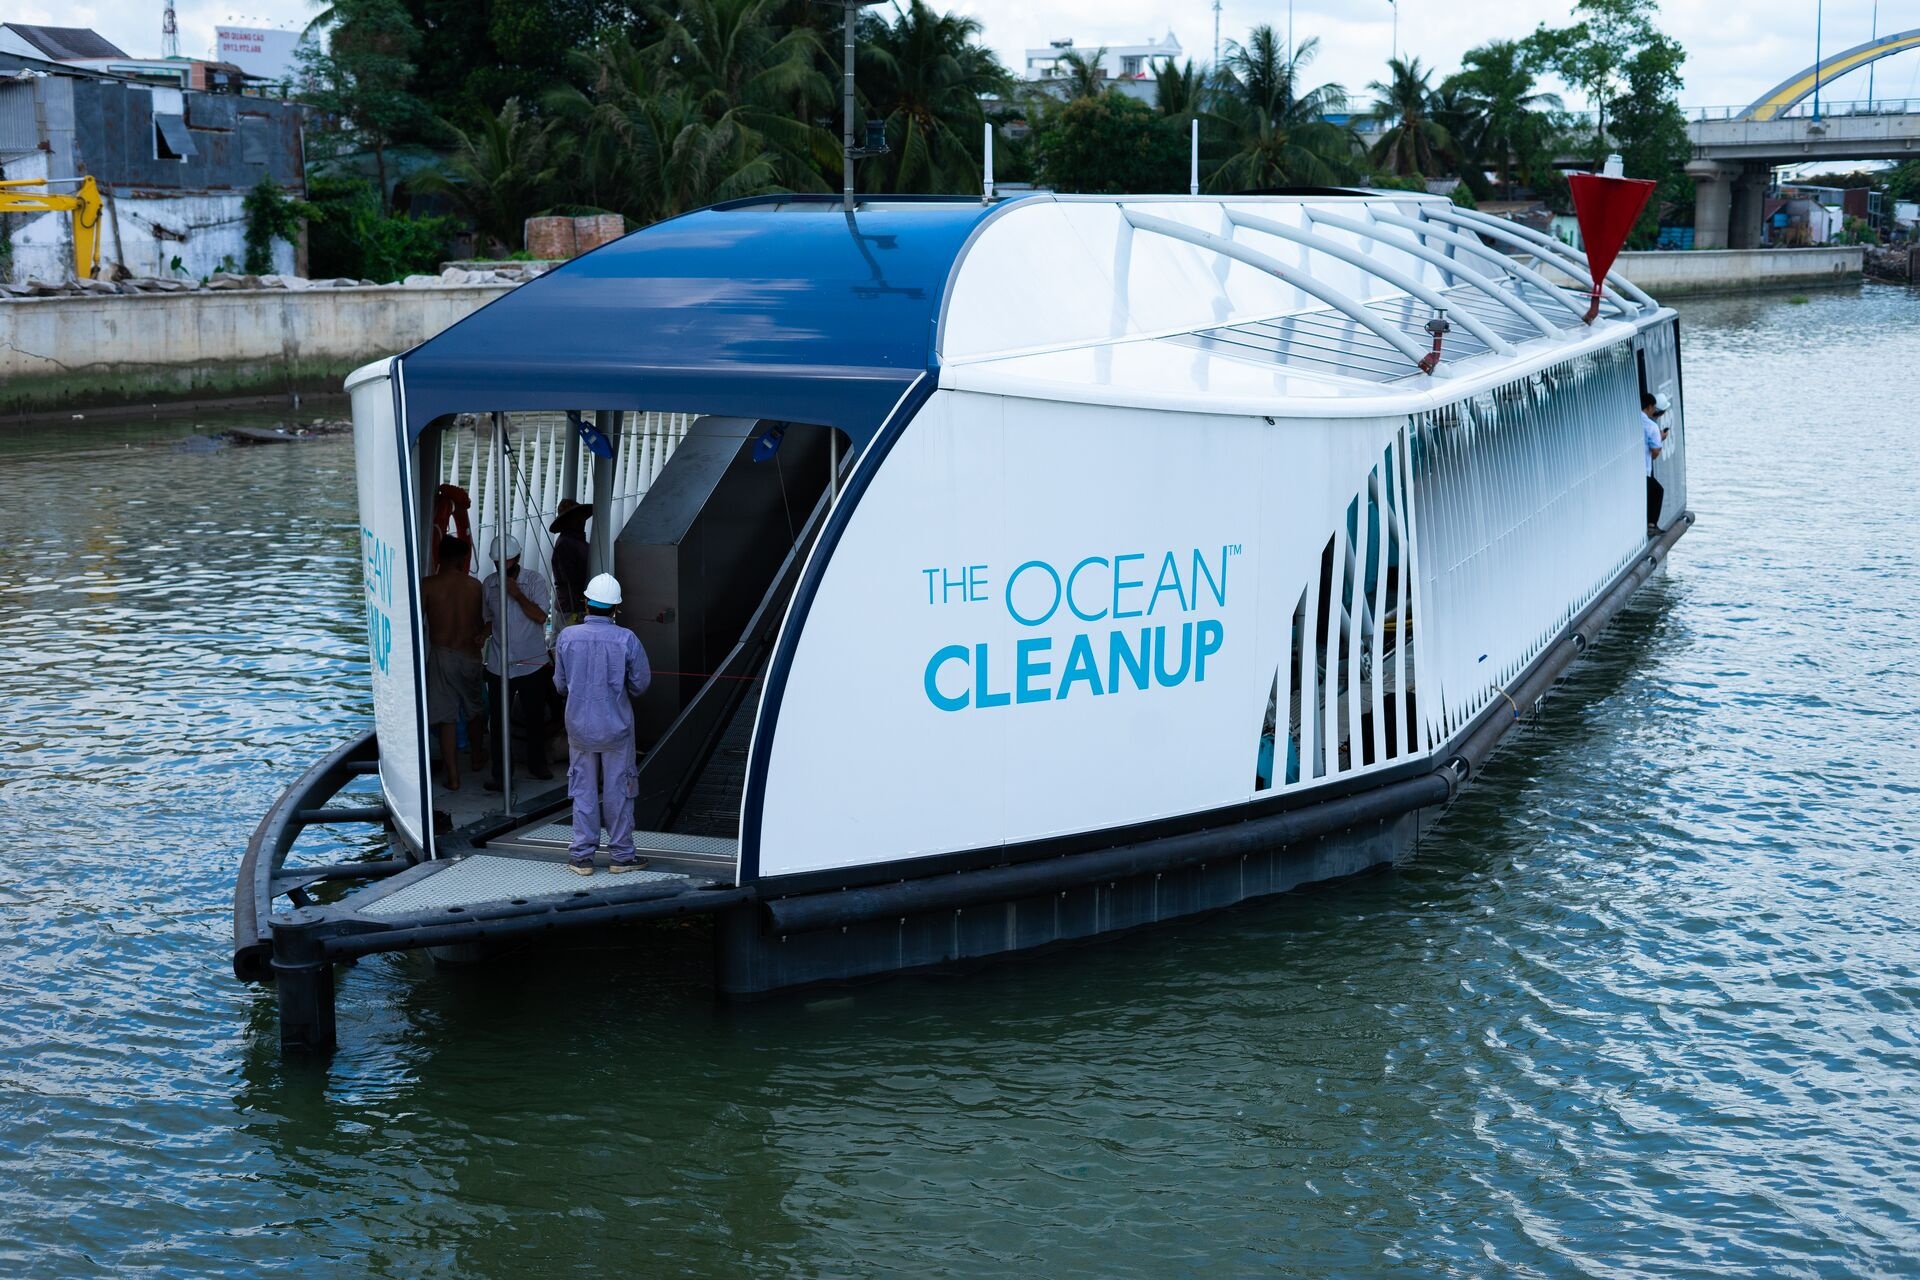 The InterceptorTM took the first shot in a series of environmental partnership activities between The Coca-Cola Company and The Ocean Cleanup